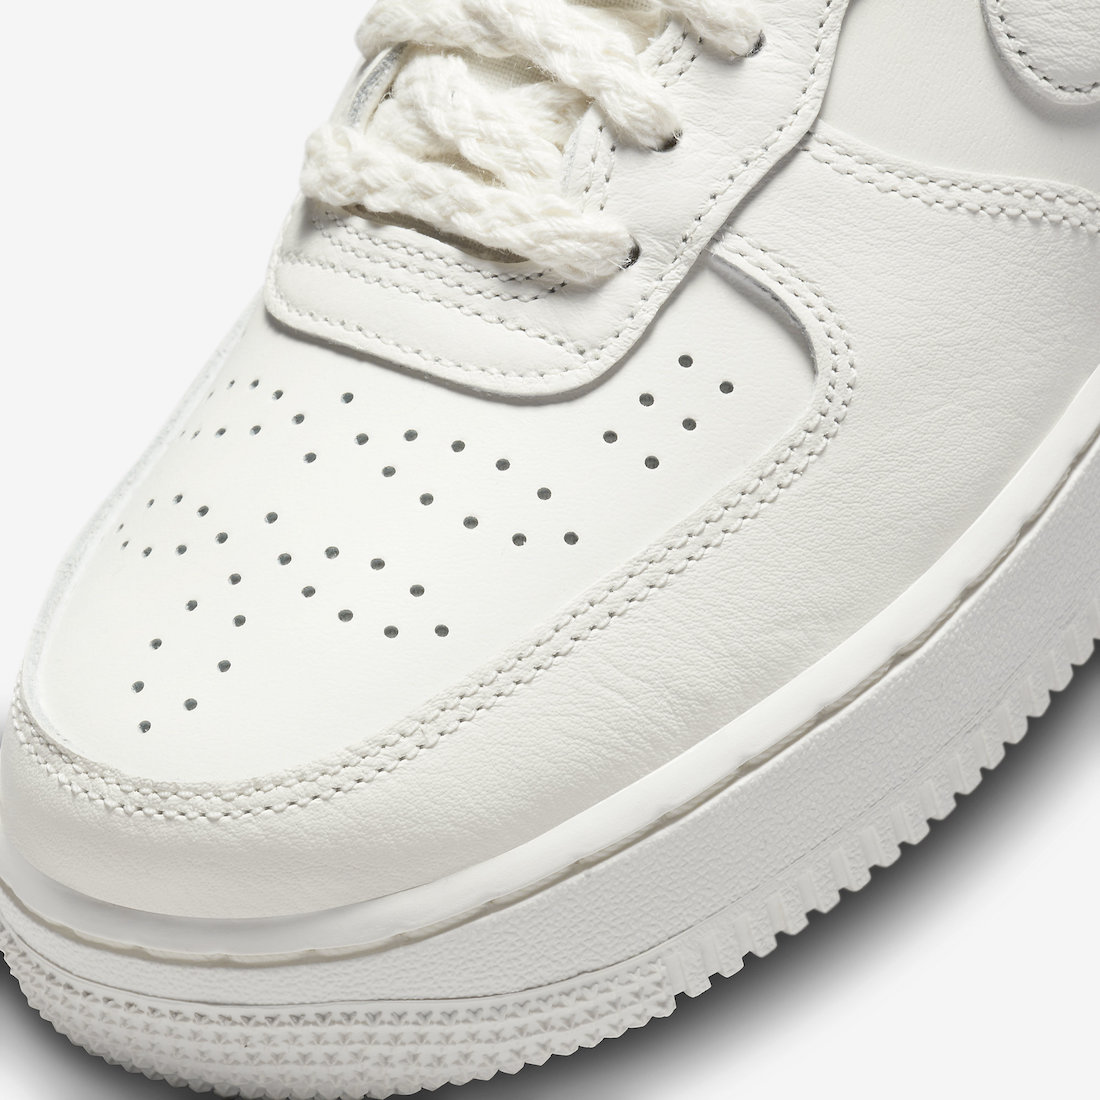 Nike Air Force 1 Low Sail FJ4559-133 Release Date + Where to Buy ...